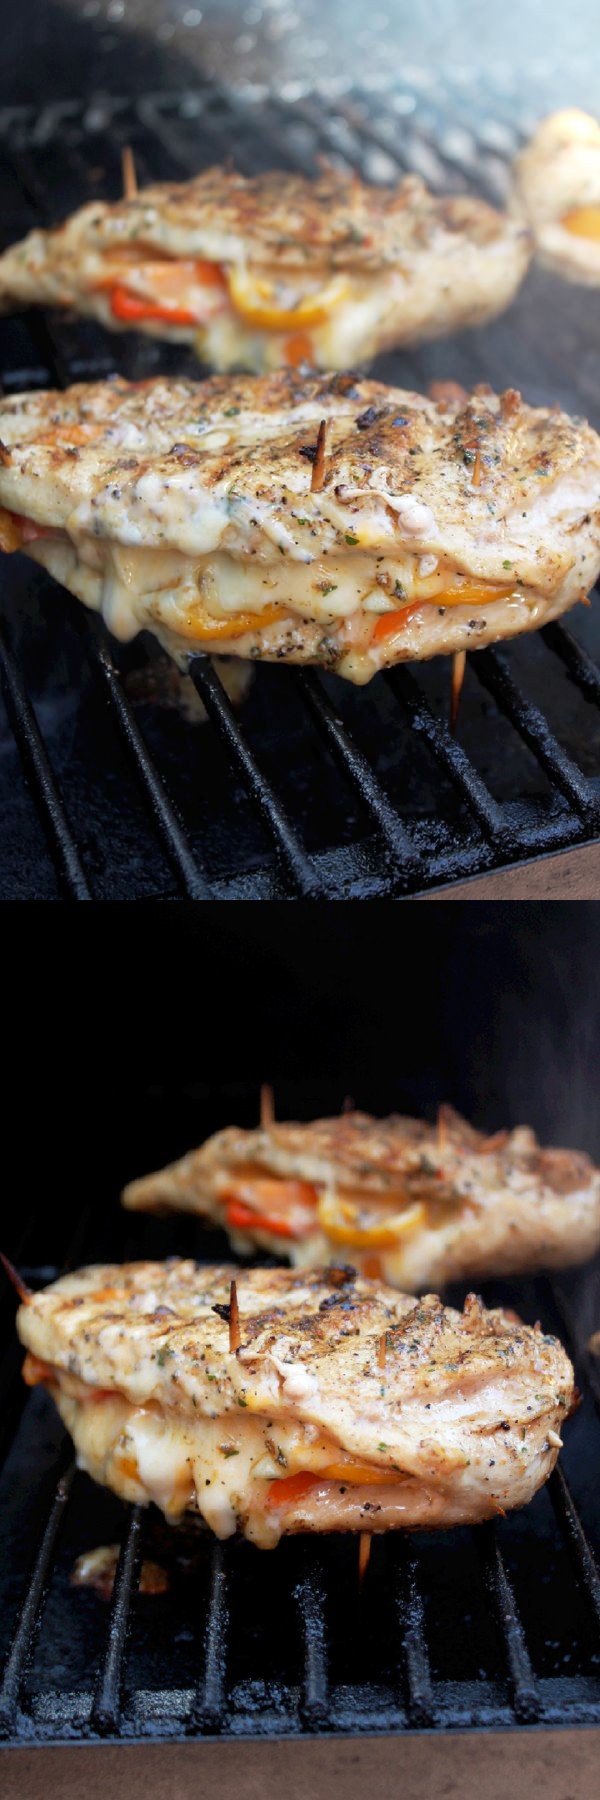 Grilled Chicken Stuffed with Cheese and Peppers